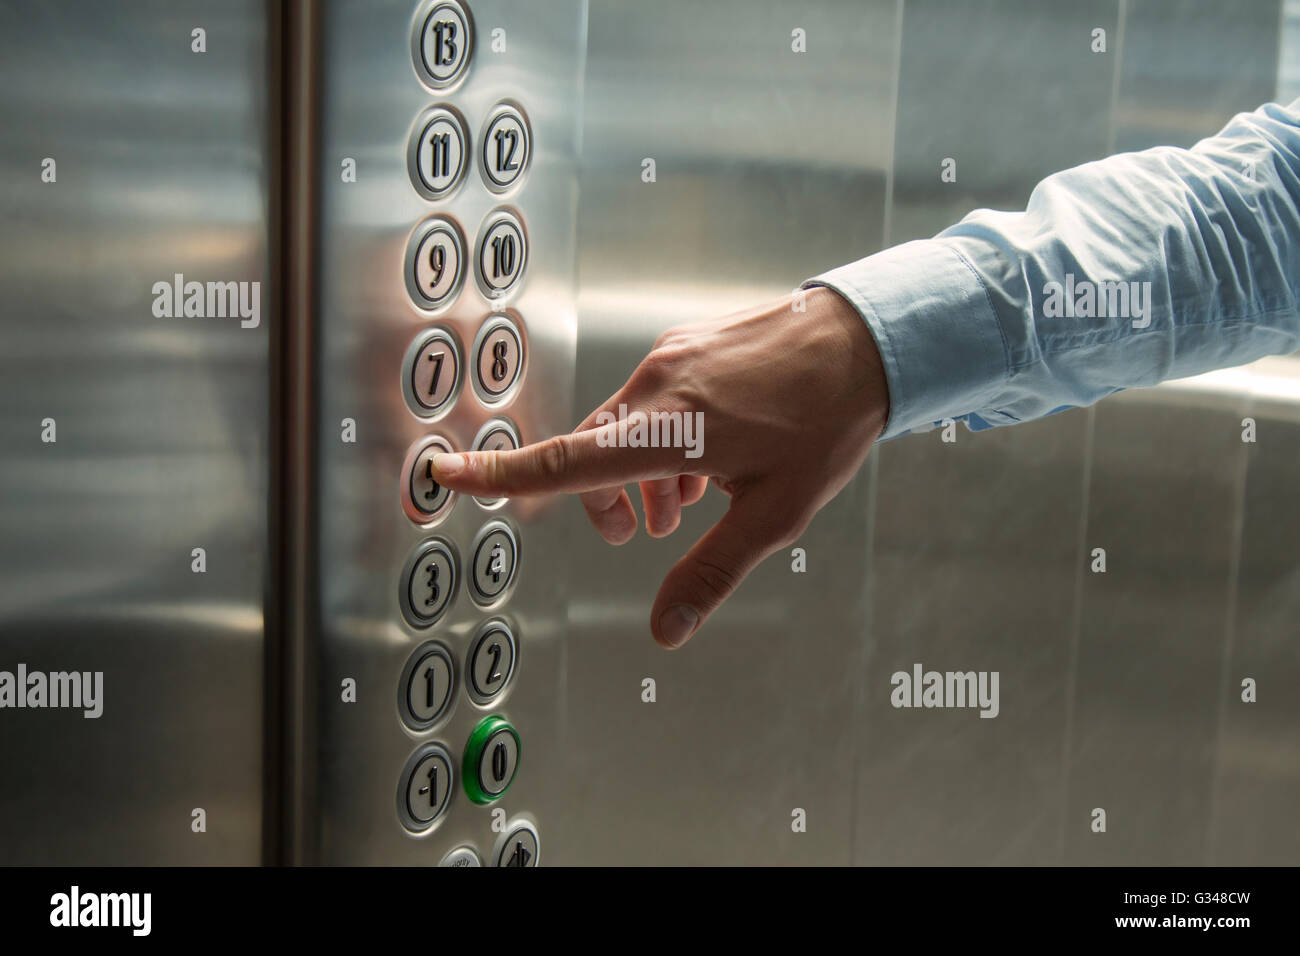 Pressing the button in the elevator Stock Photo